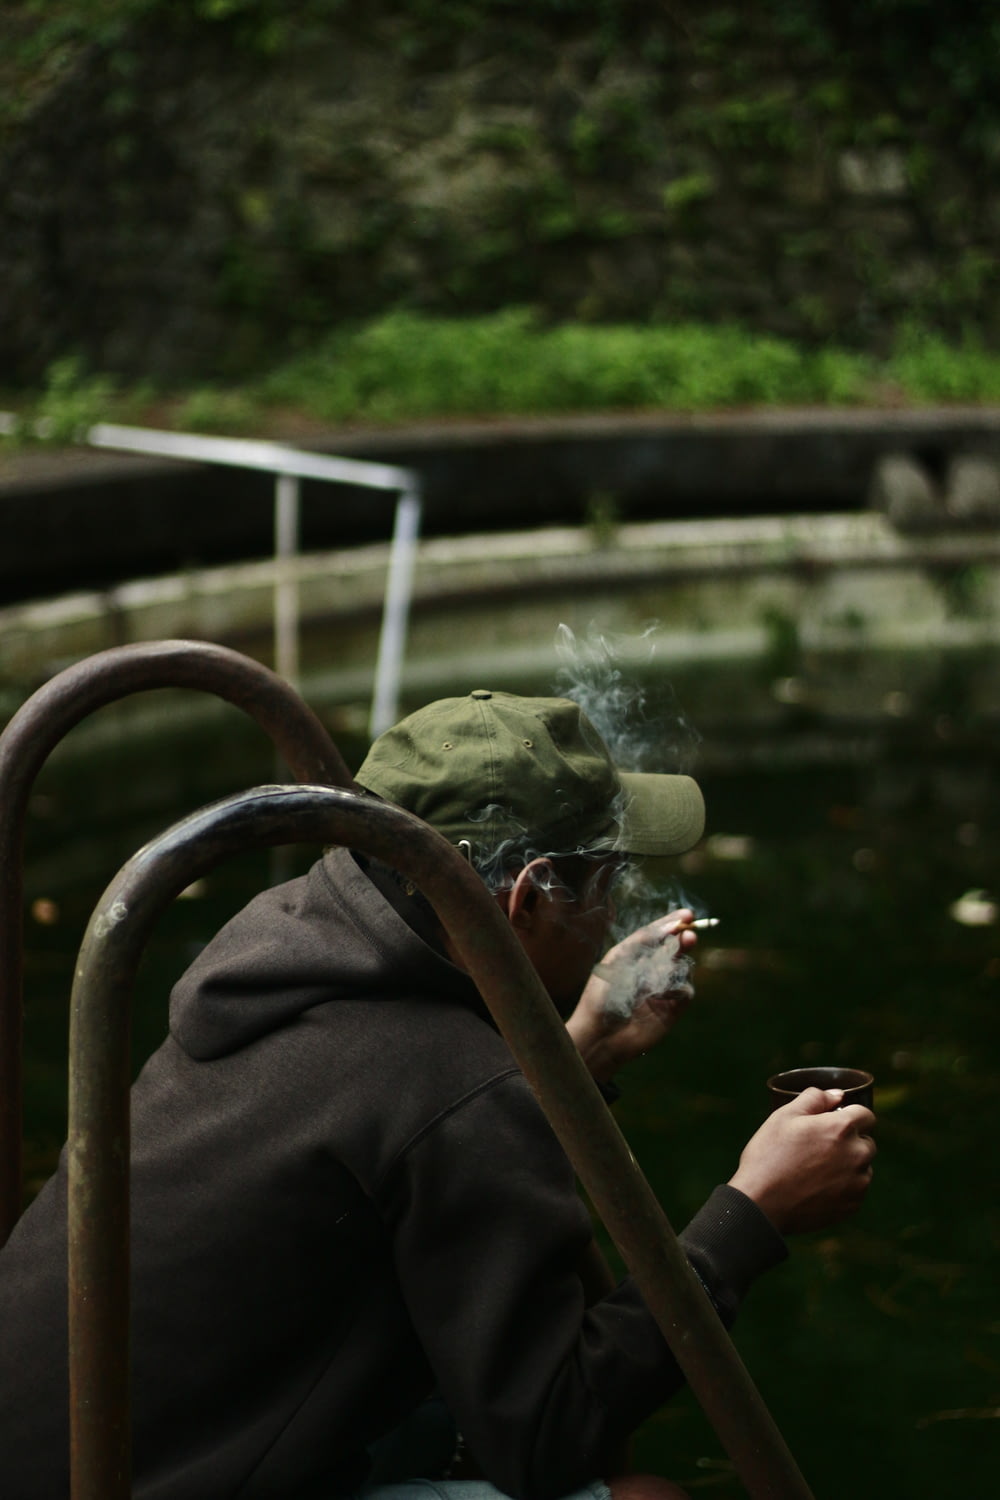 man sitting while having coffee and smoking between rails